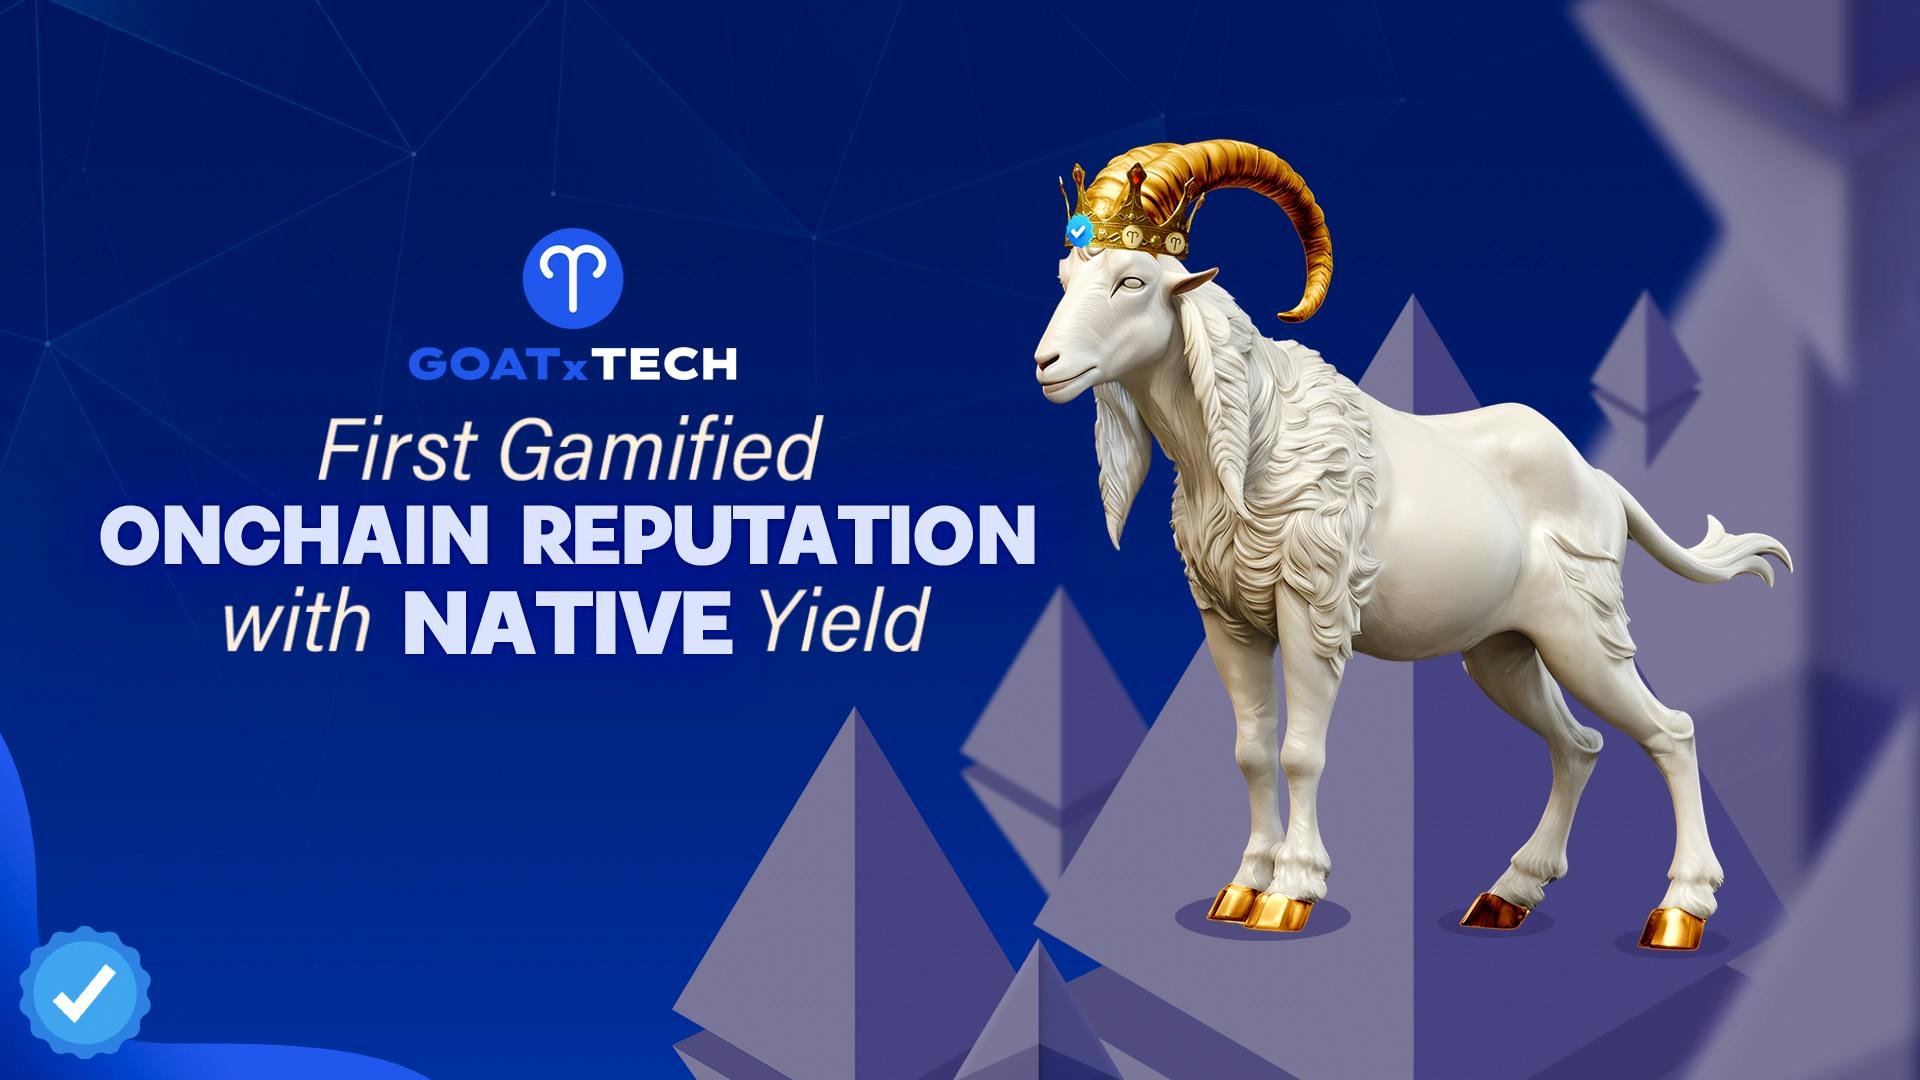 Goat Dapp - The first Gamified On-chain Reputation with Native Yield